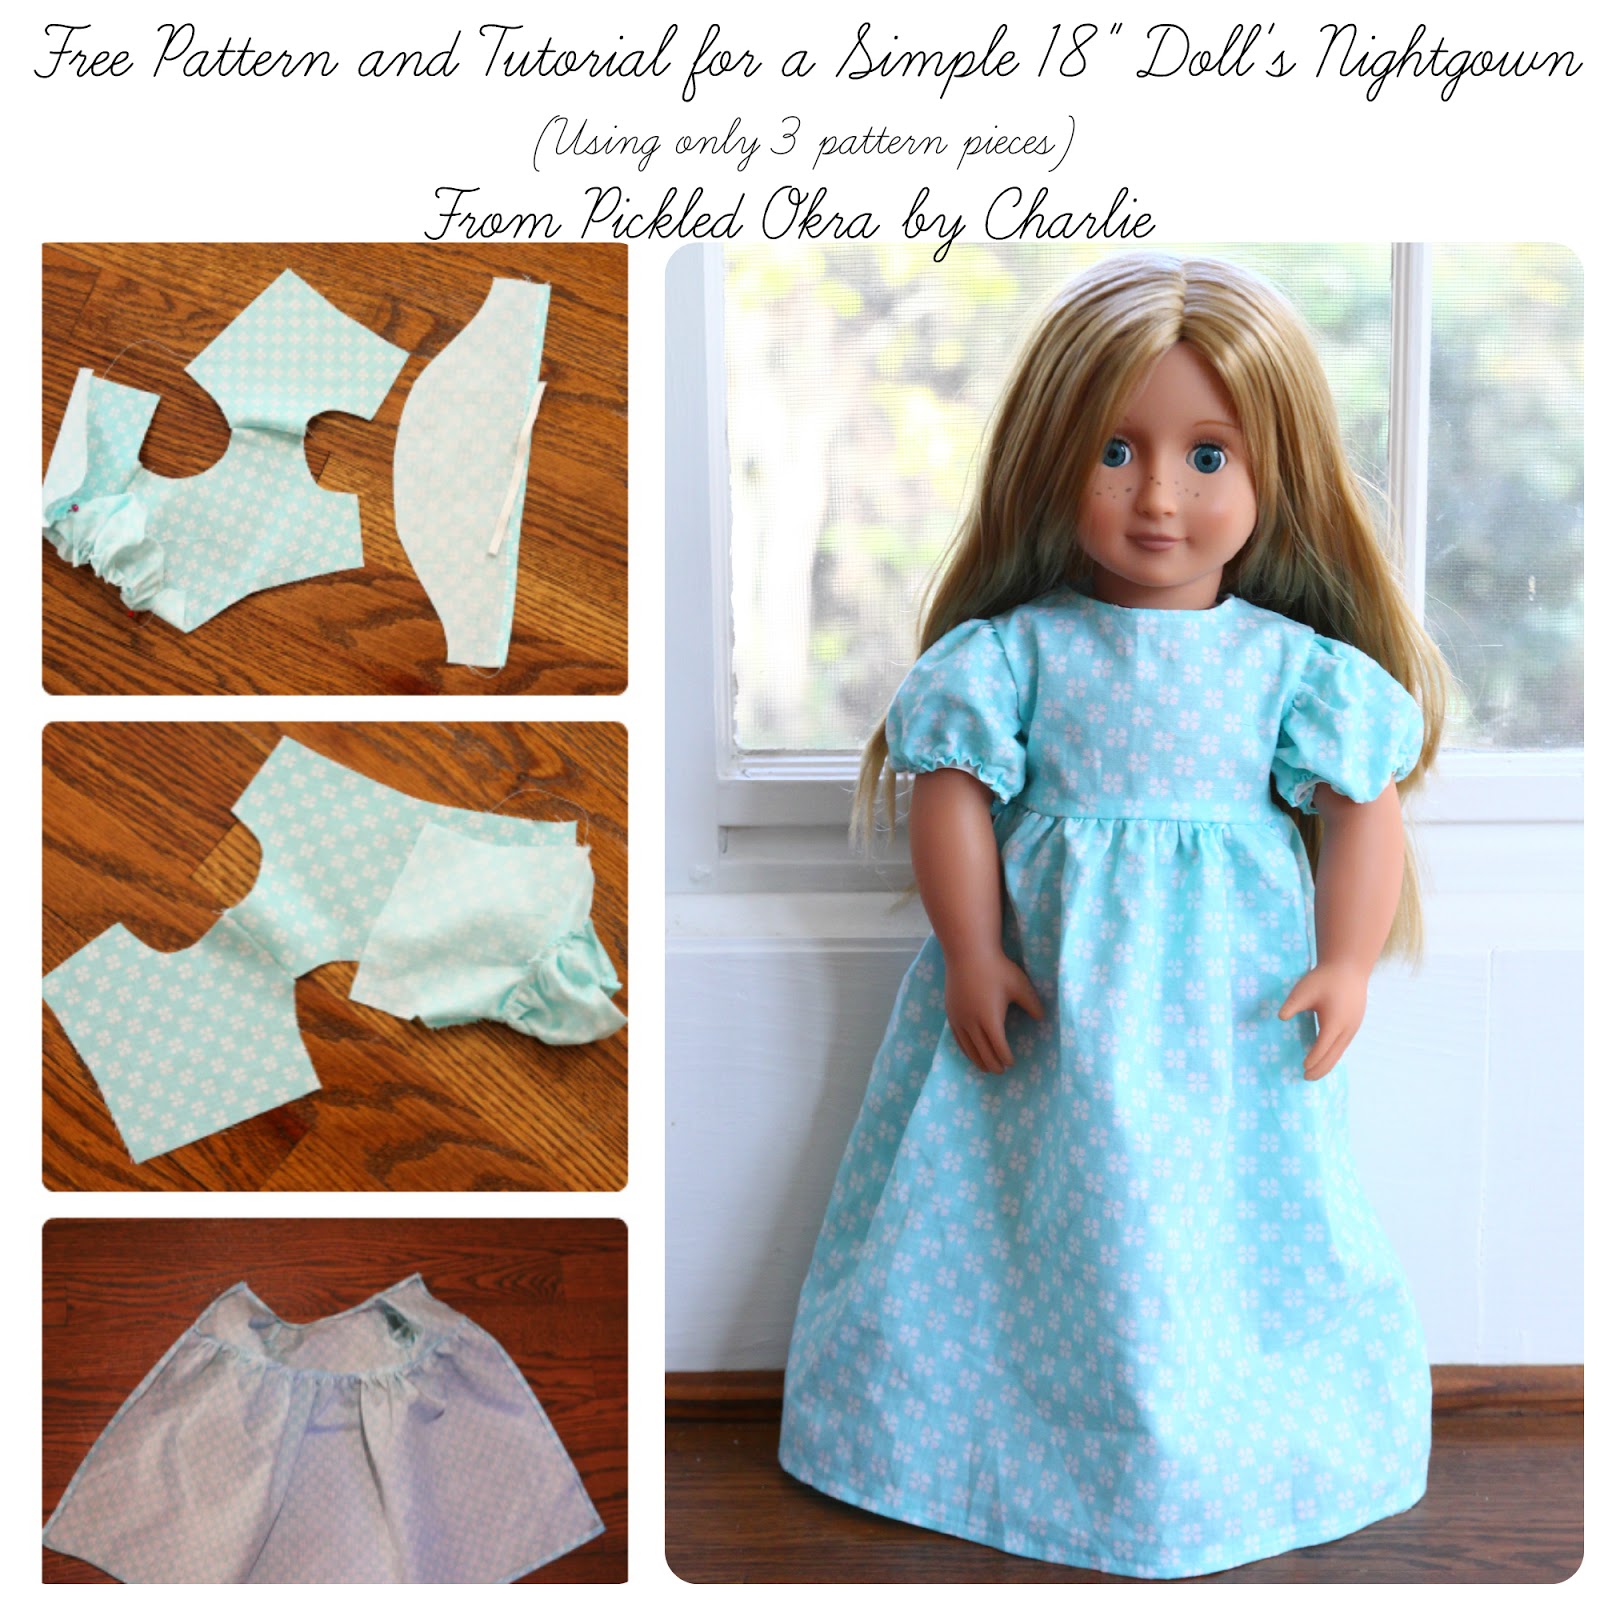 Free Pattern And Tutorial For A Simple 18 Doll S Nightgown